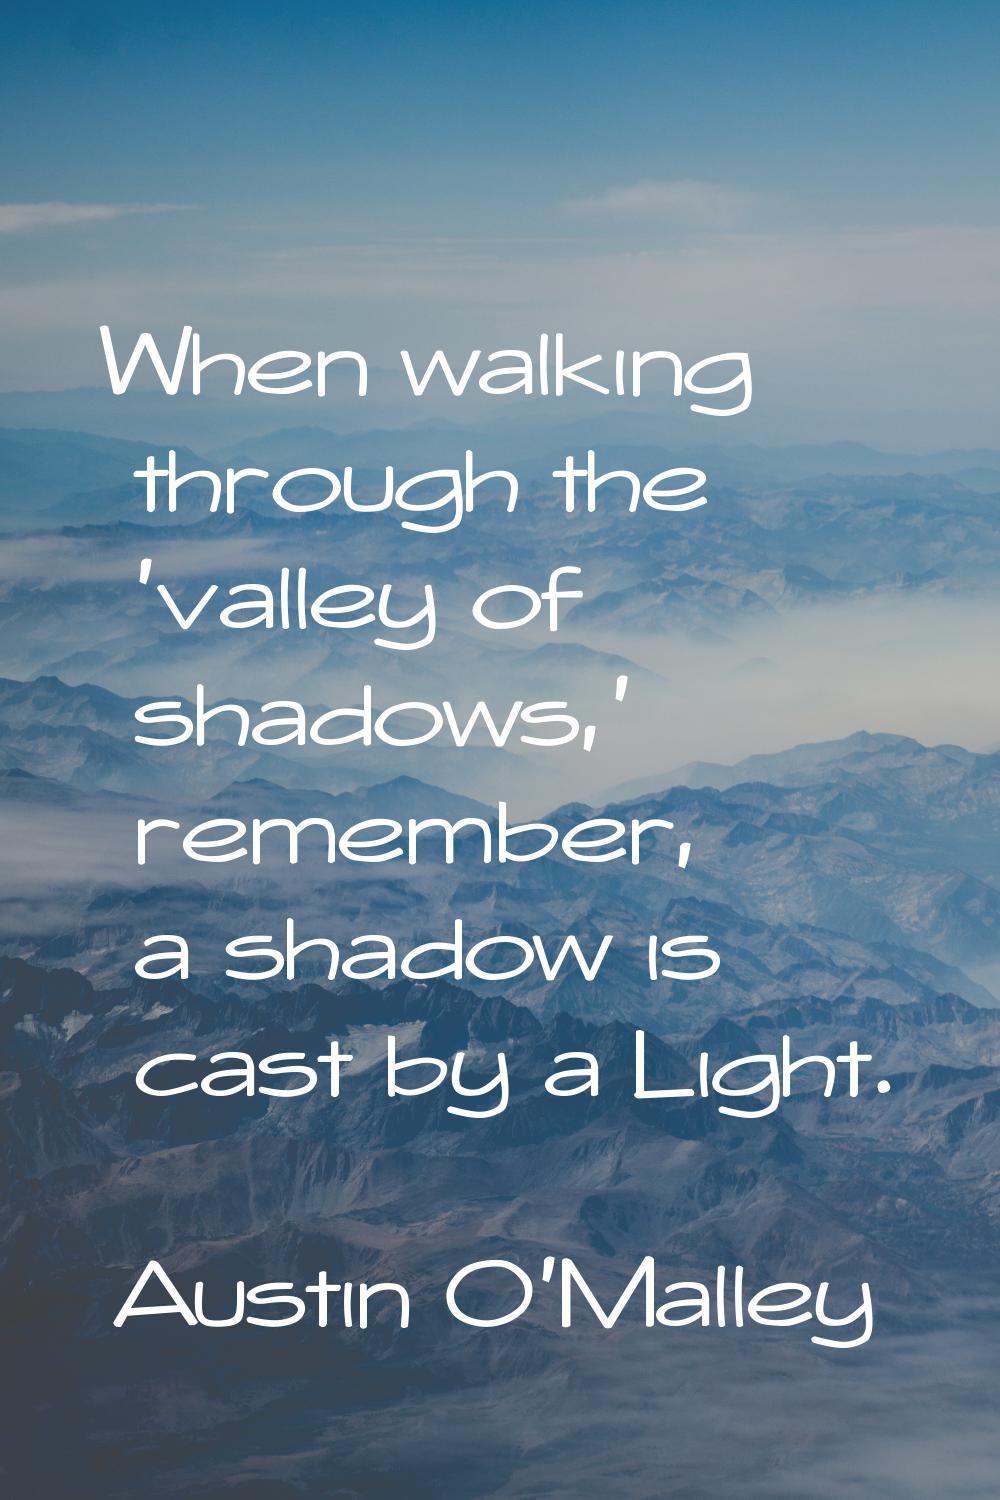 When walking through the 'valley of shadows,' remember, a shadow is cast by a Light.